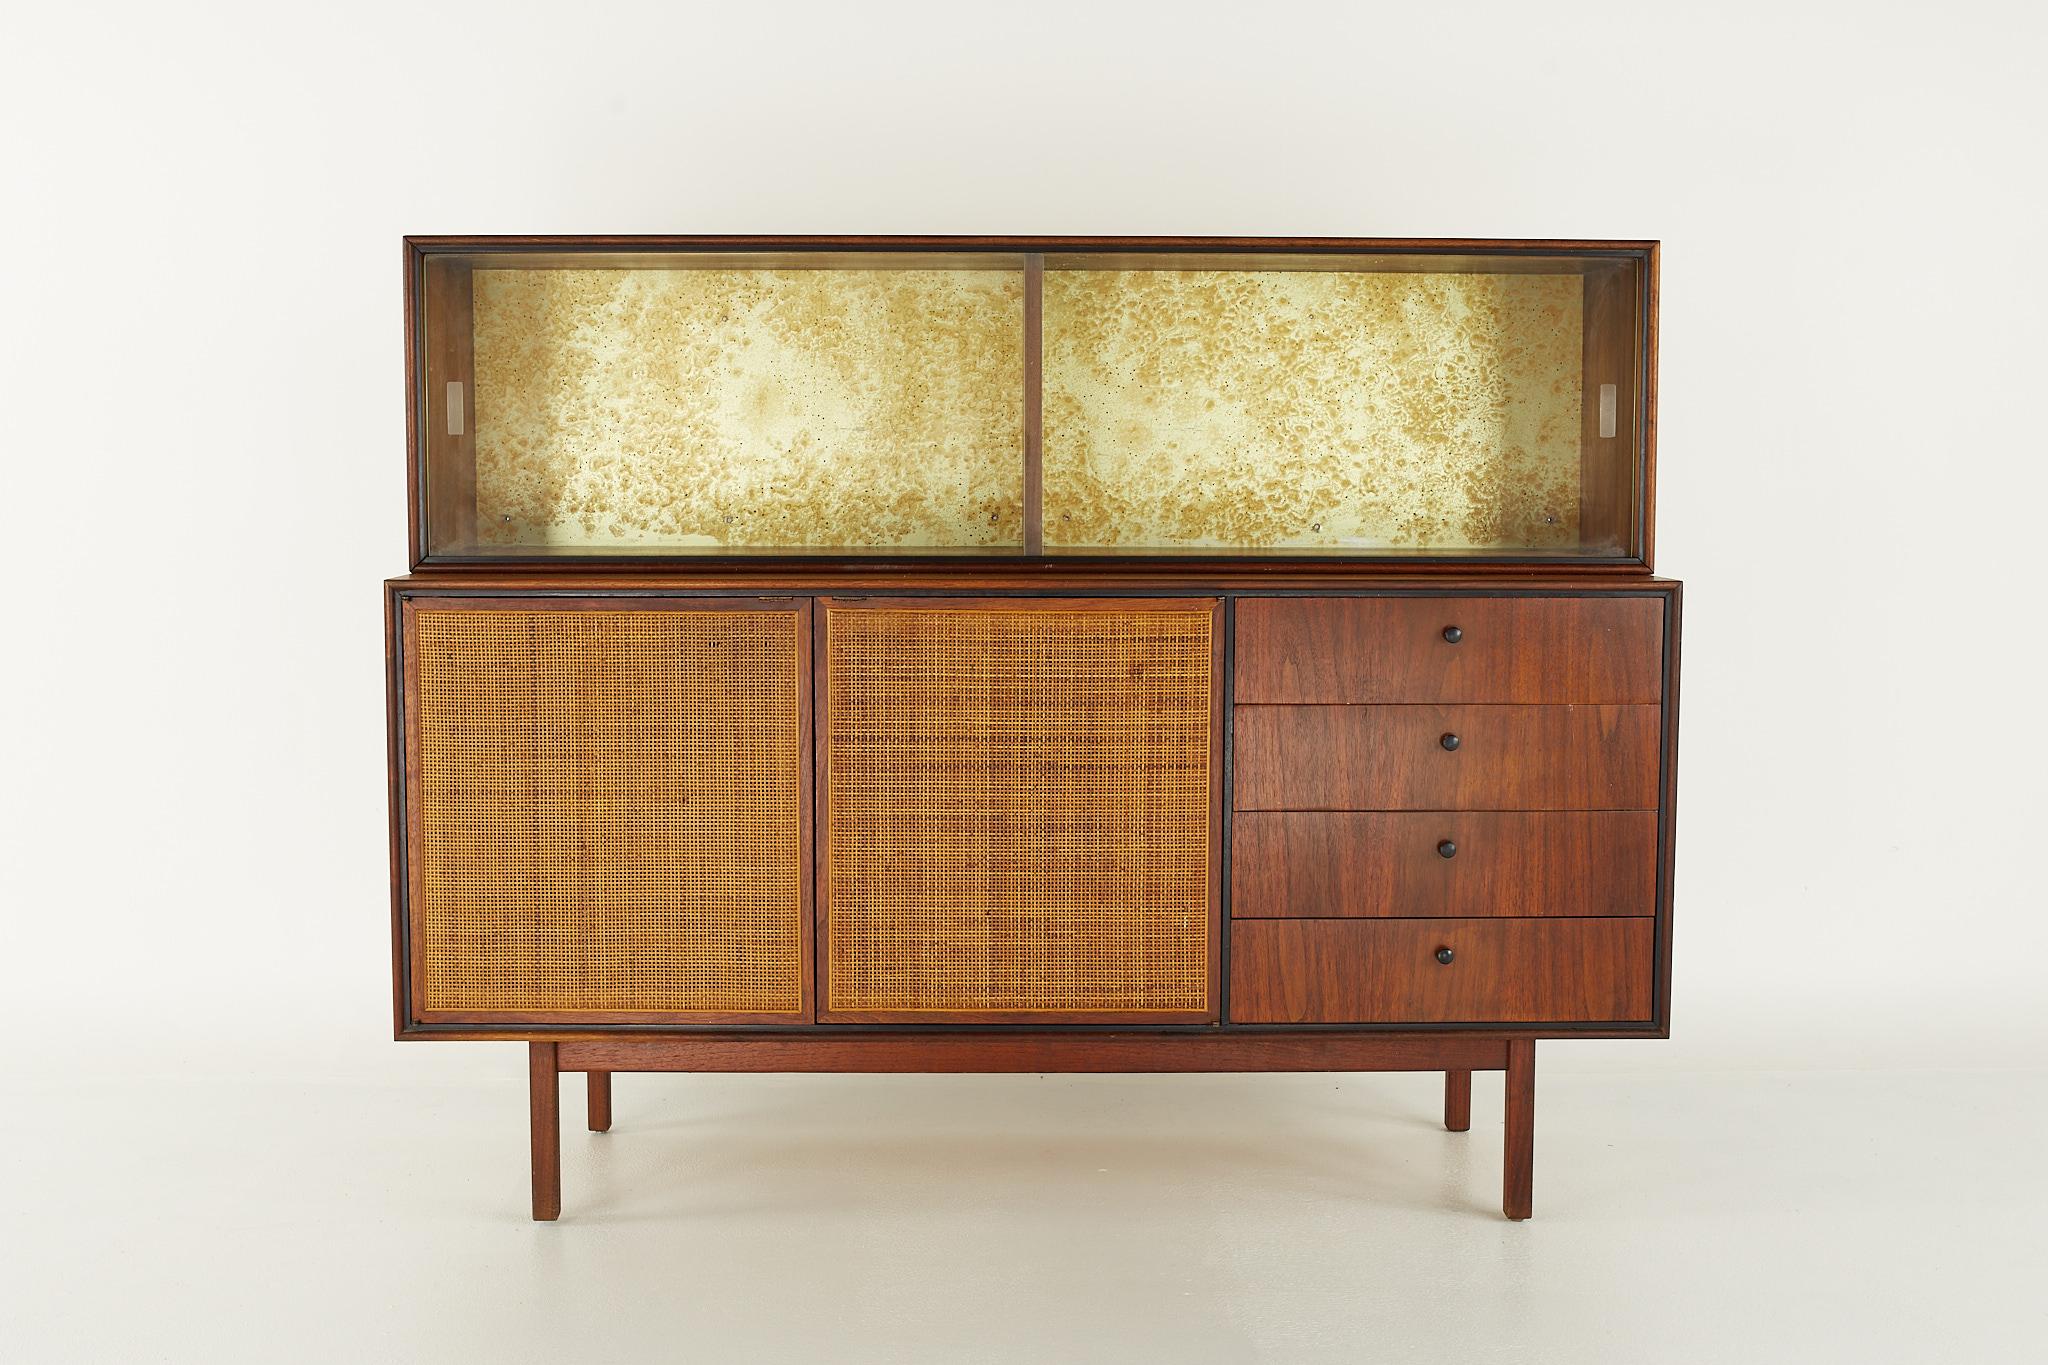 Jack Cartwright style founders mid century cane front credenza with hutch

Credenza measures: 60 wide x 8 deep x 30.5 inches high
Hutch measures: 60 wide x 13 deep x 16 inches high

?All pieces of furniture can be had in what we call restored